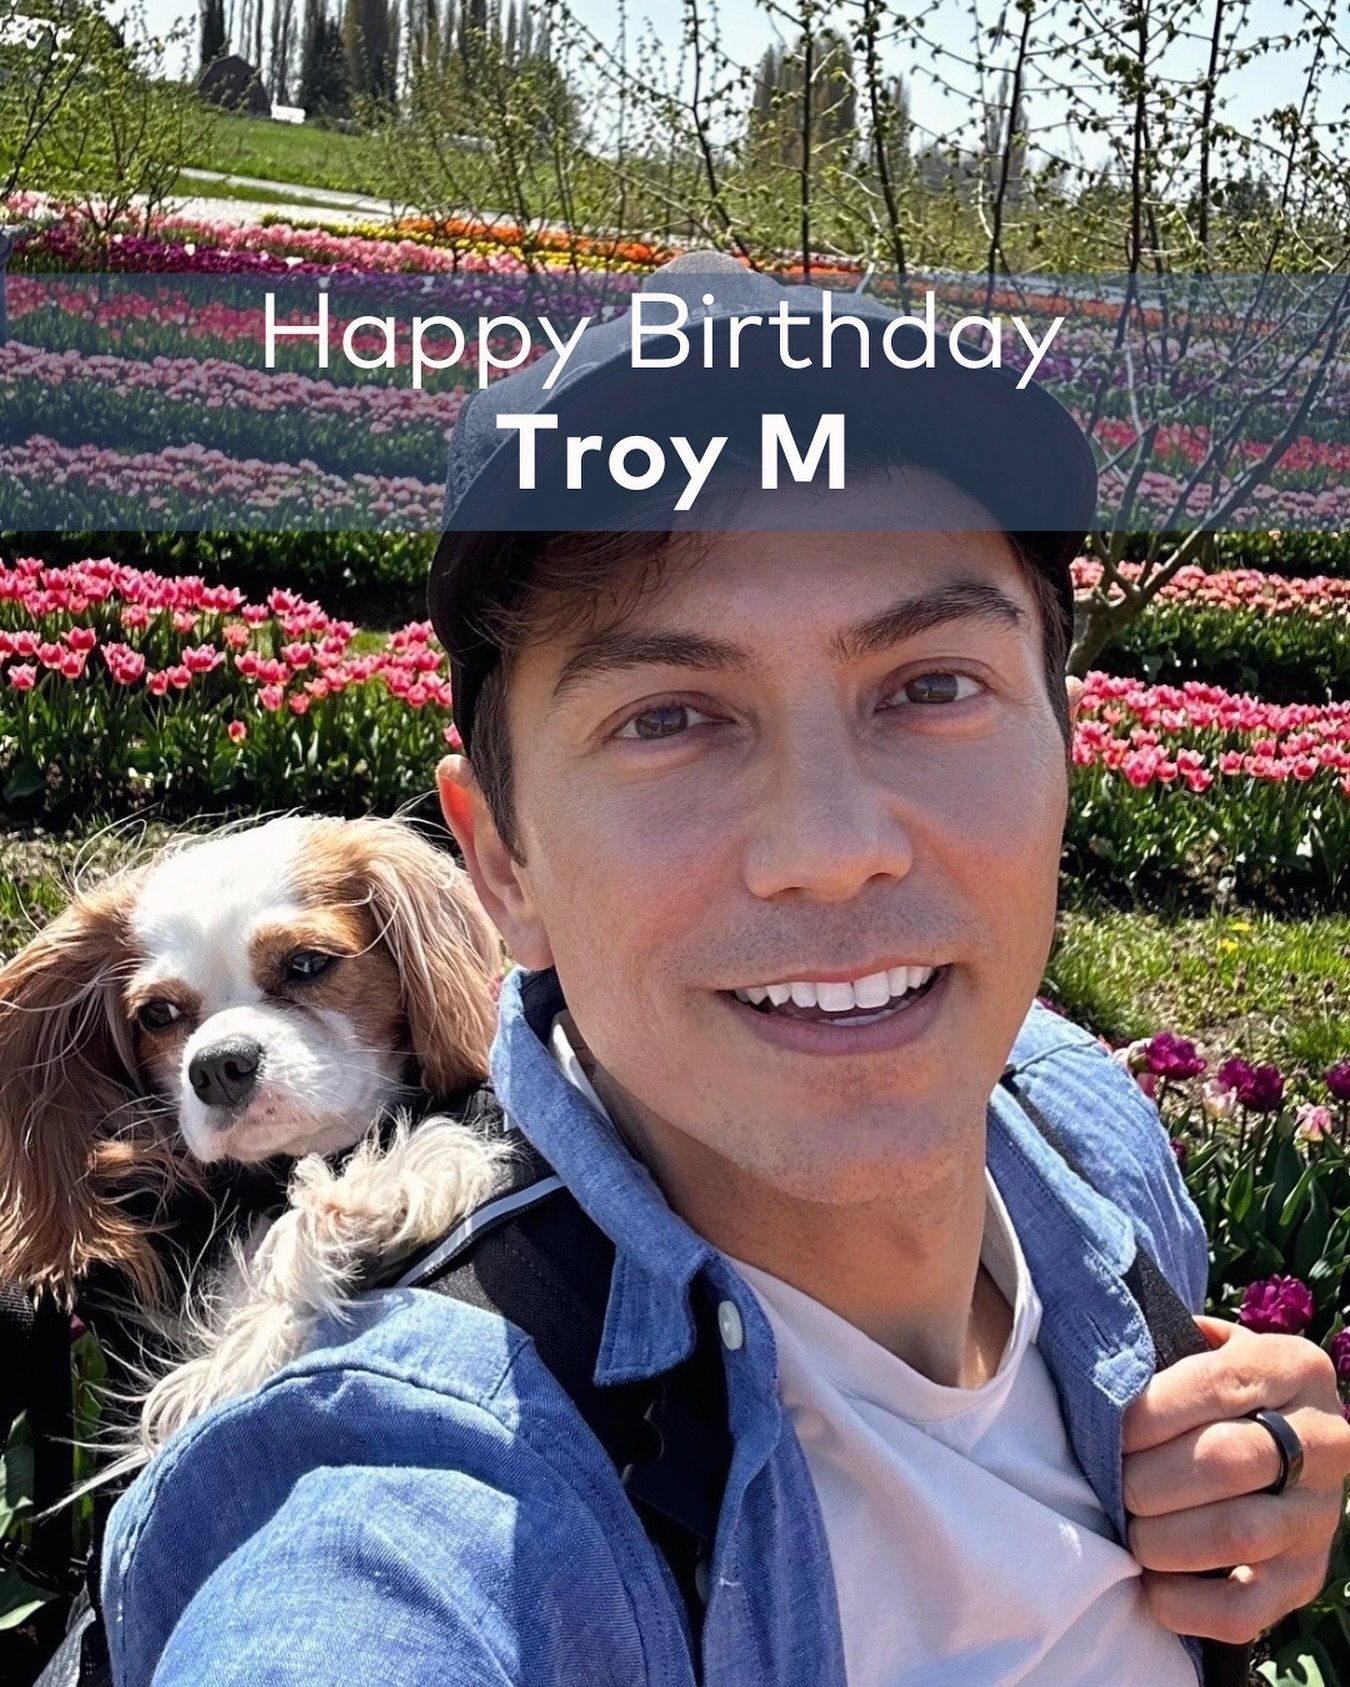 Happy birthday @troy808 !!!
Troy is friendly, kind, and a hard working &ldquo;Jack of all trades.&rdquo; He lights up a room and leaves people feeling uplifted.

Three fun facts about Troy:
1. He served in the Army, and was deployed to Iraq.
2. He st